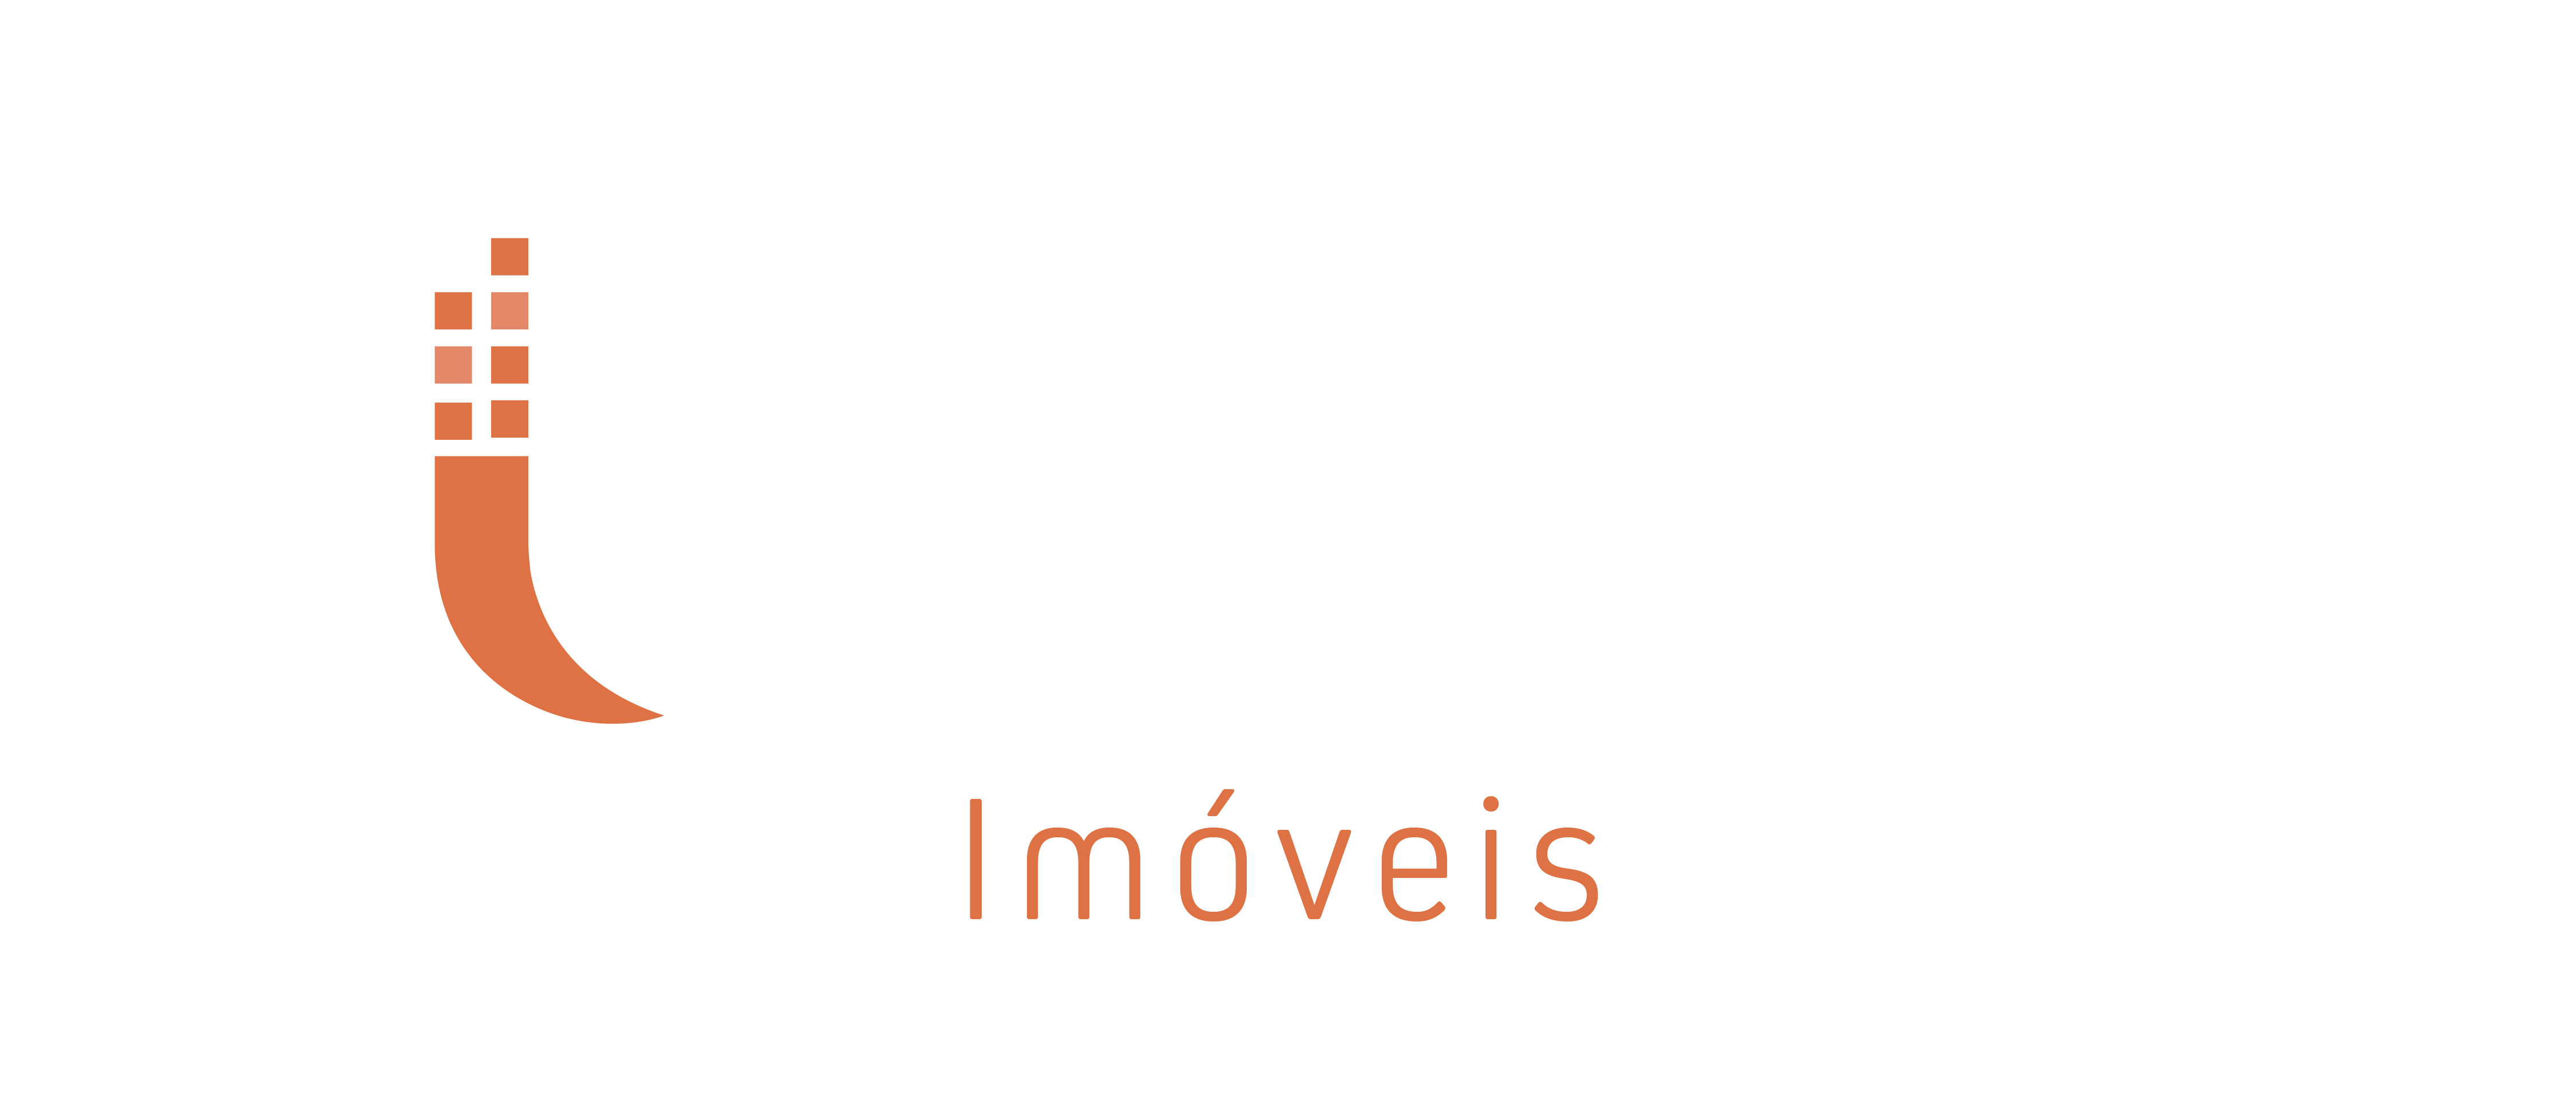 Logo with stylized guitar and "Imóveis" text.